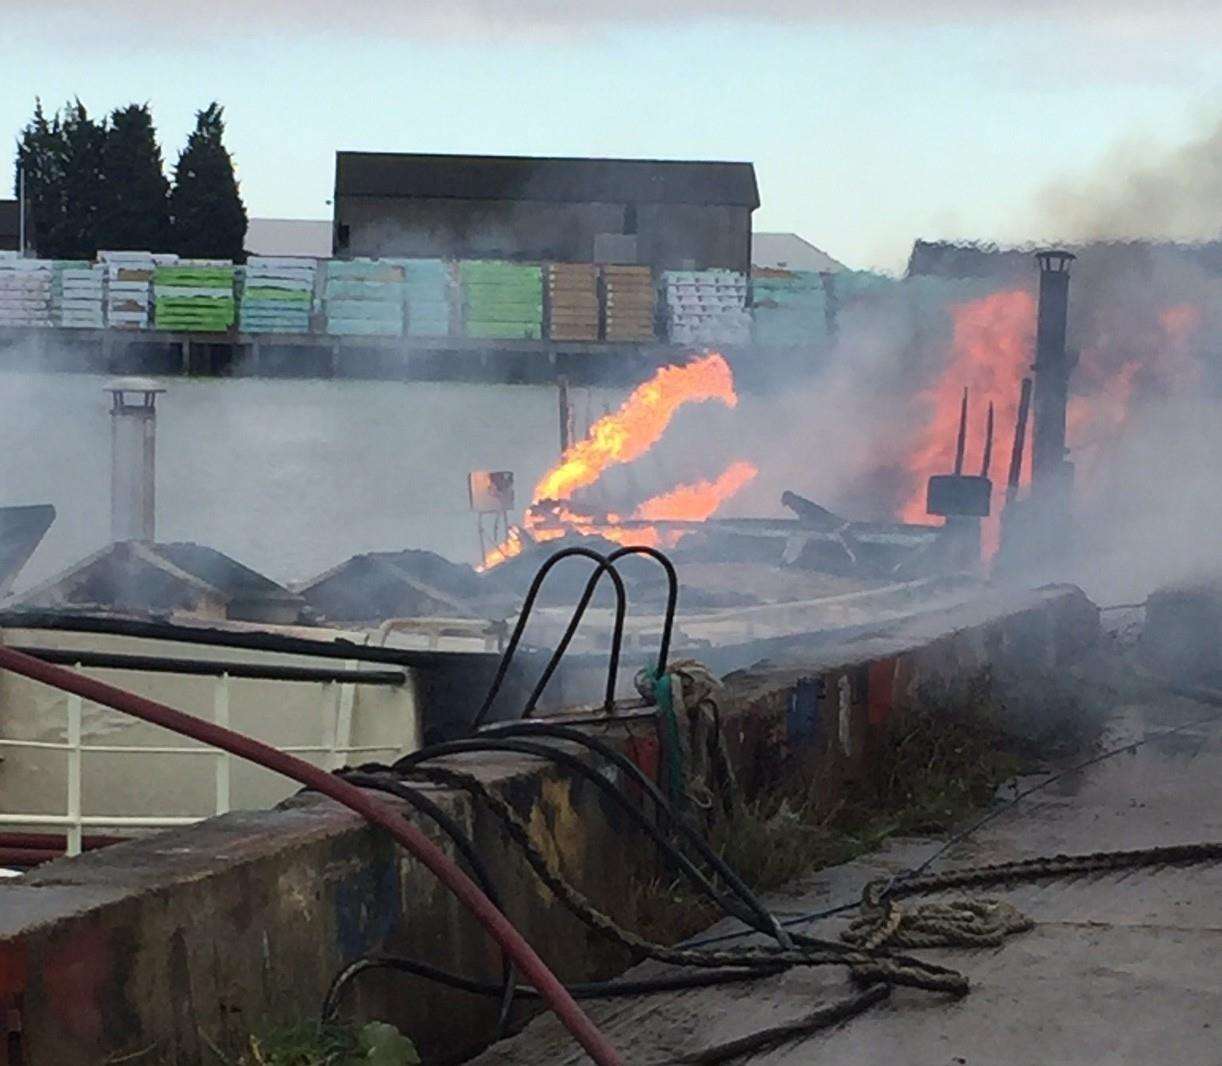 Firefighters tackled the blaze on a 40 foot vessel at Acorn Shipyard